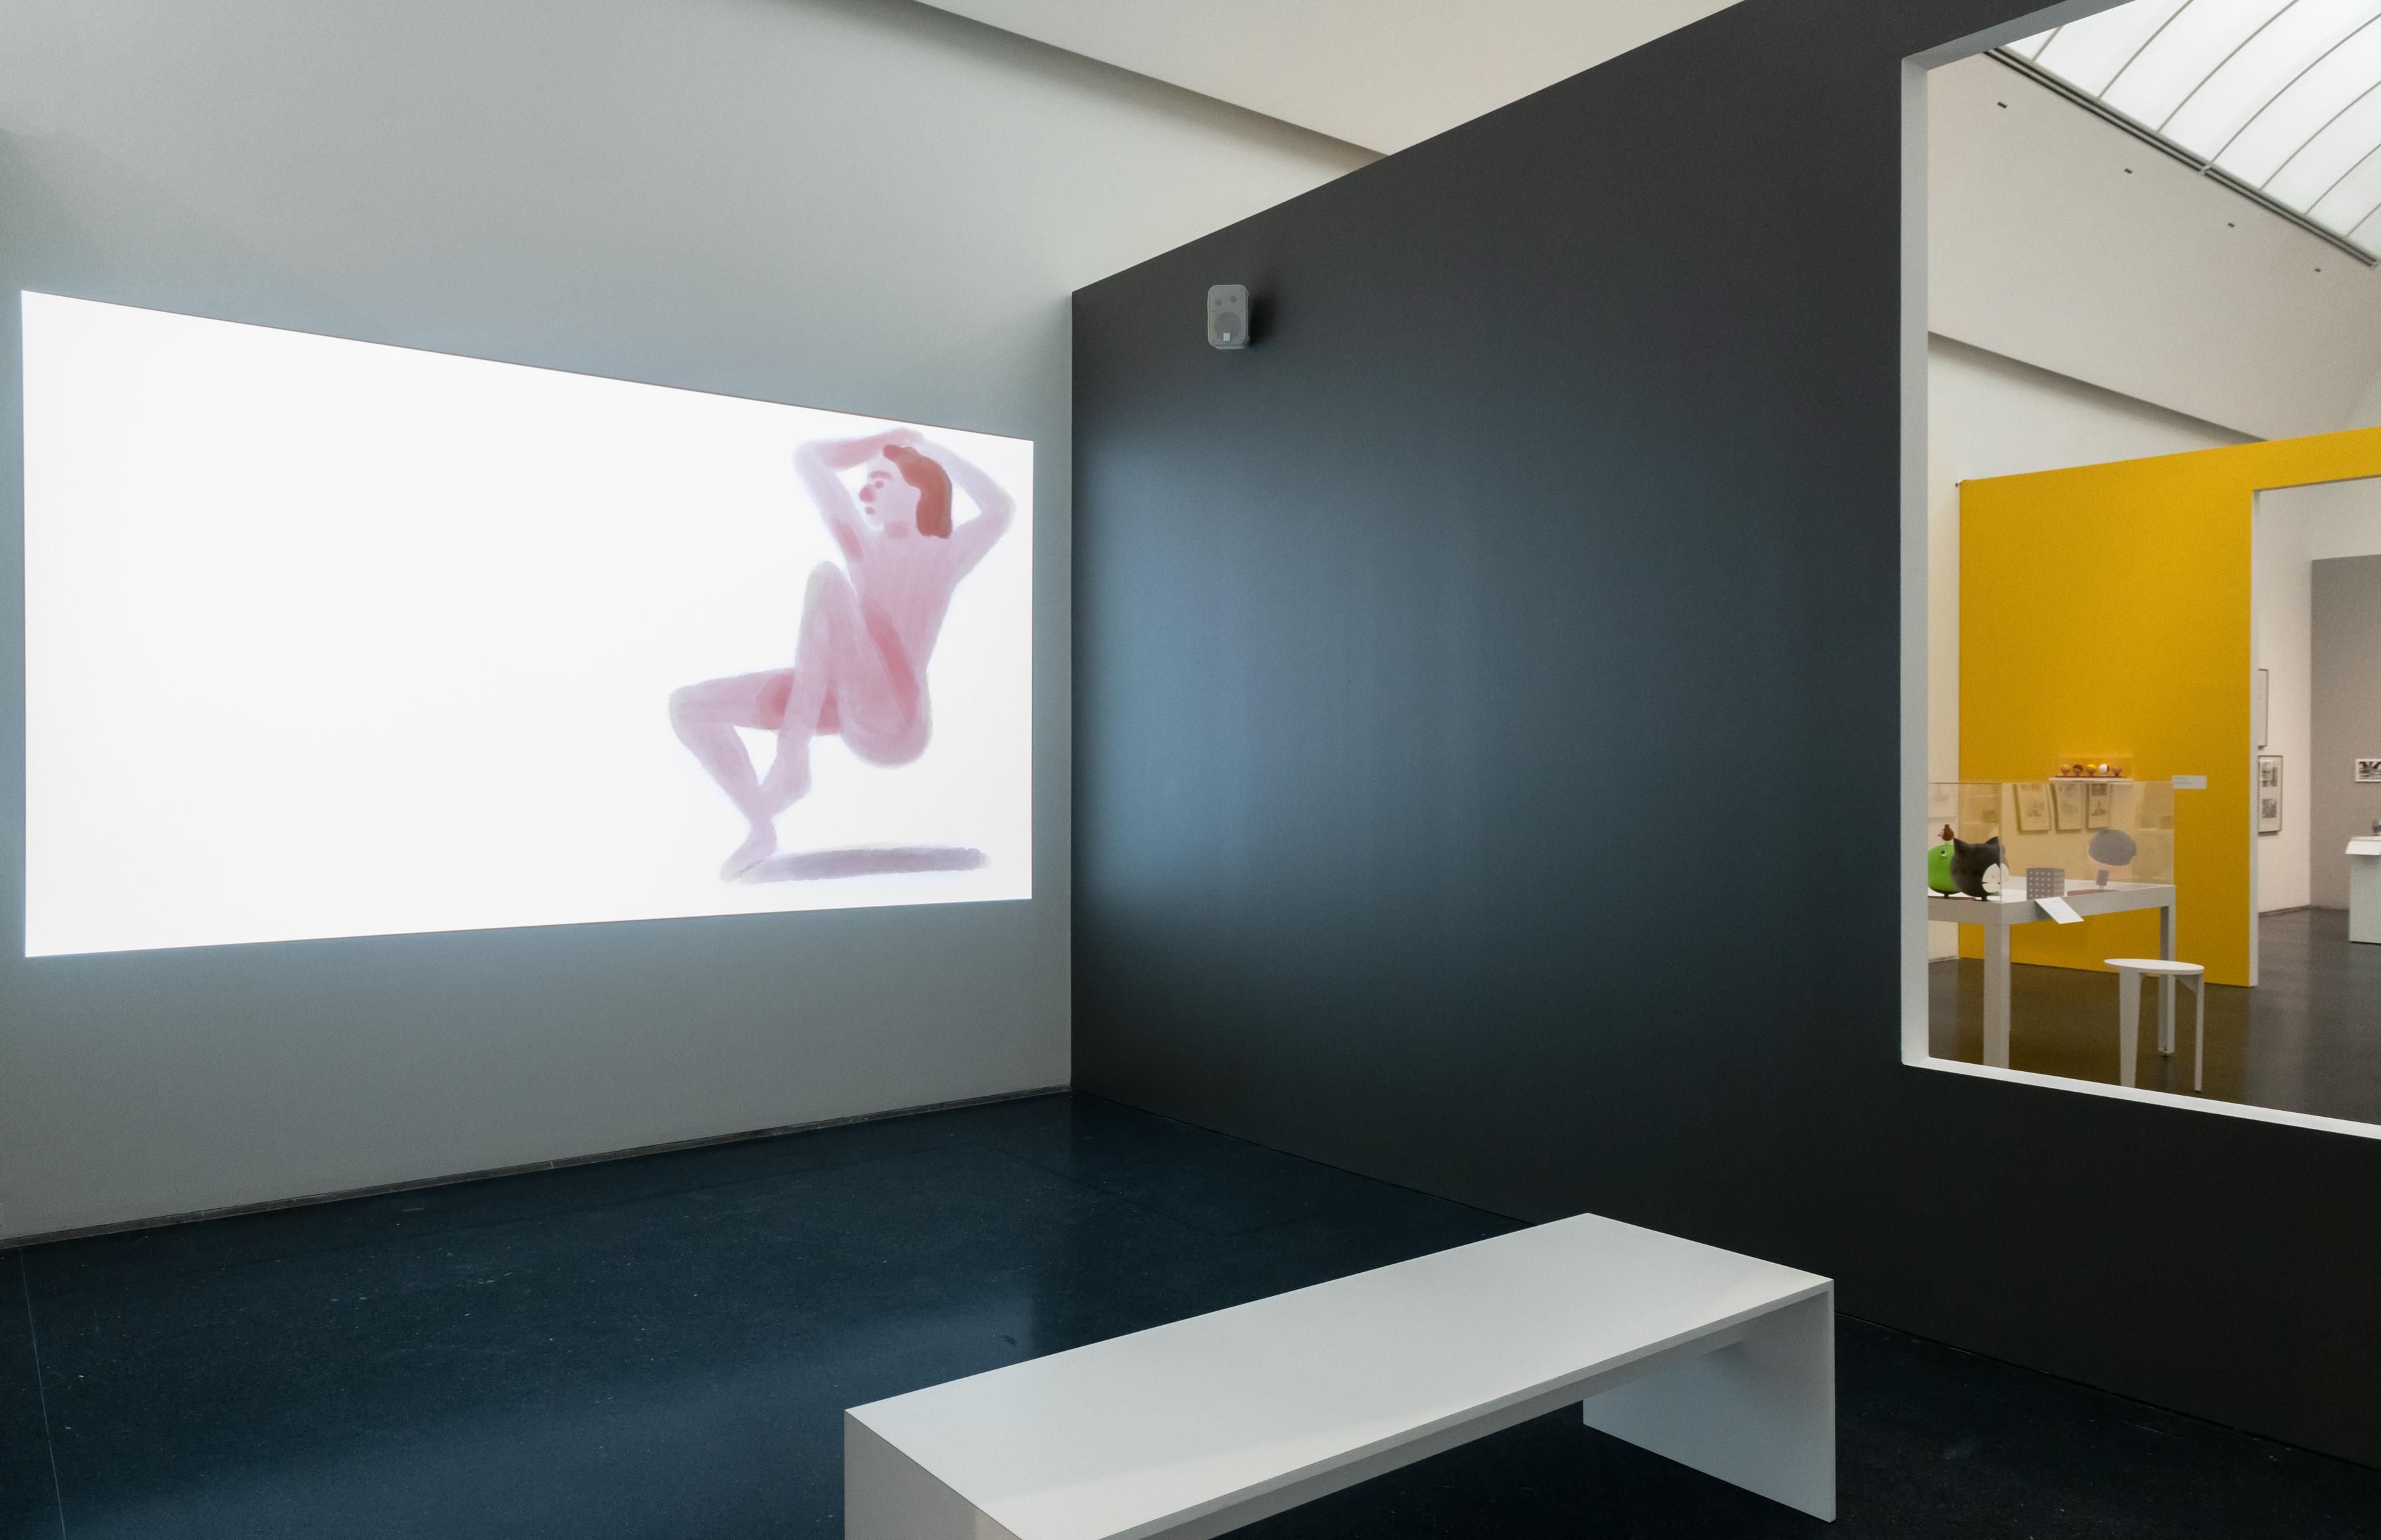 A still of a seemingly nude illustrated person in a lounge position is projected on a wall.